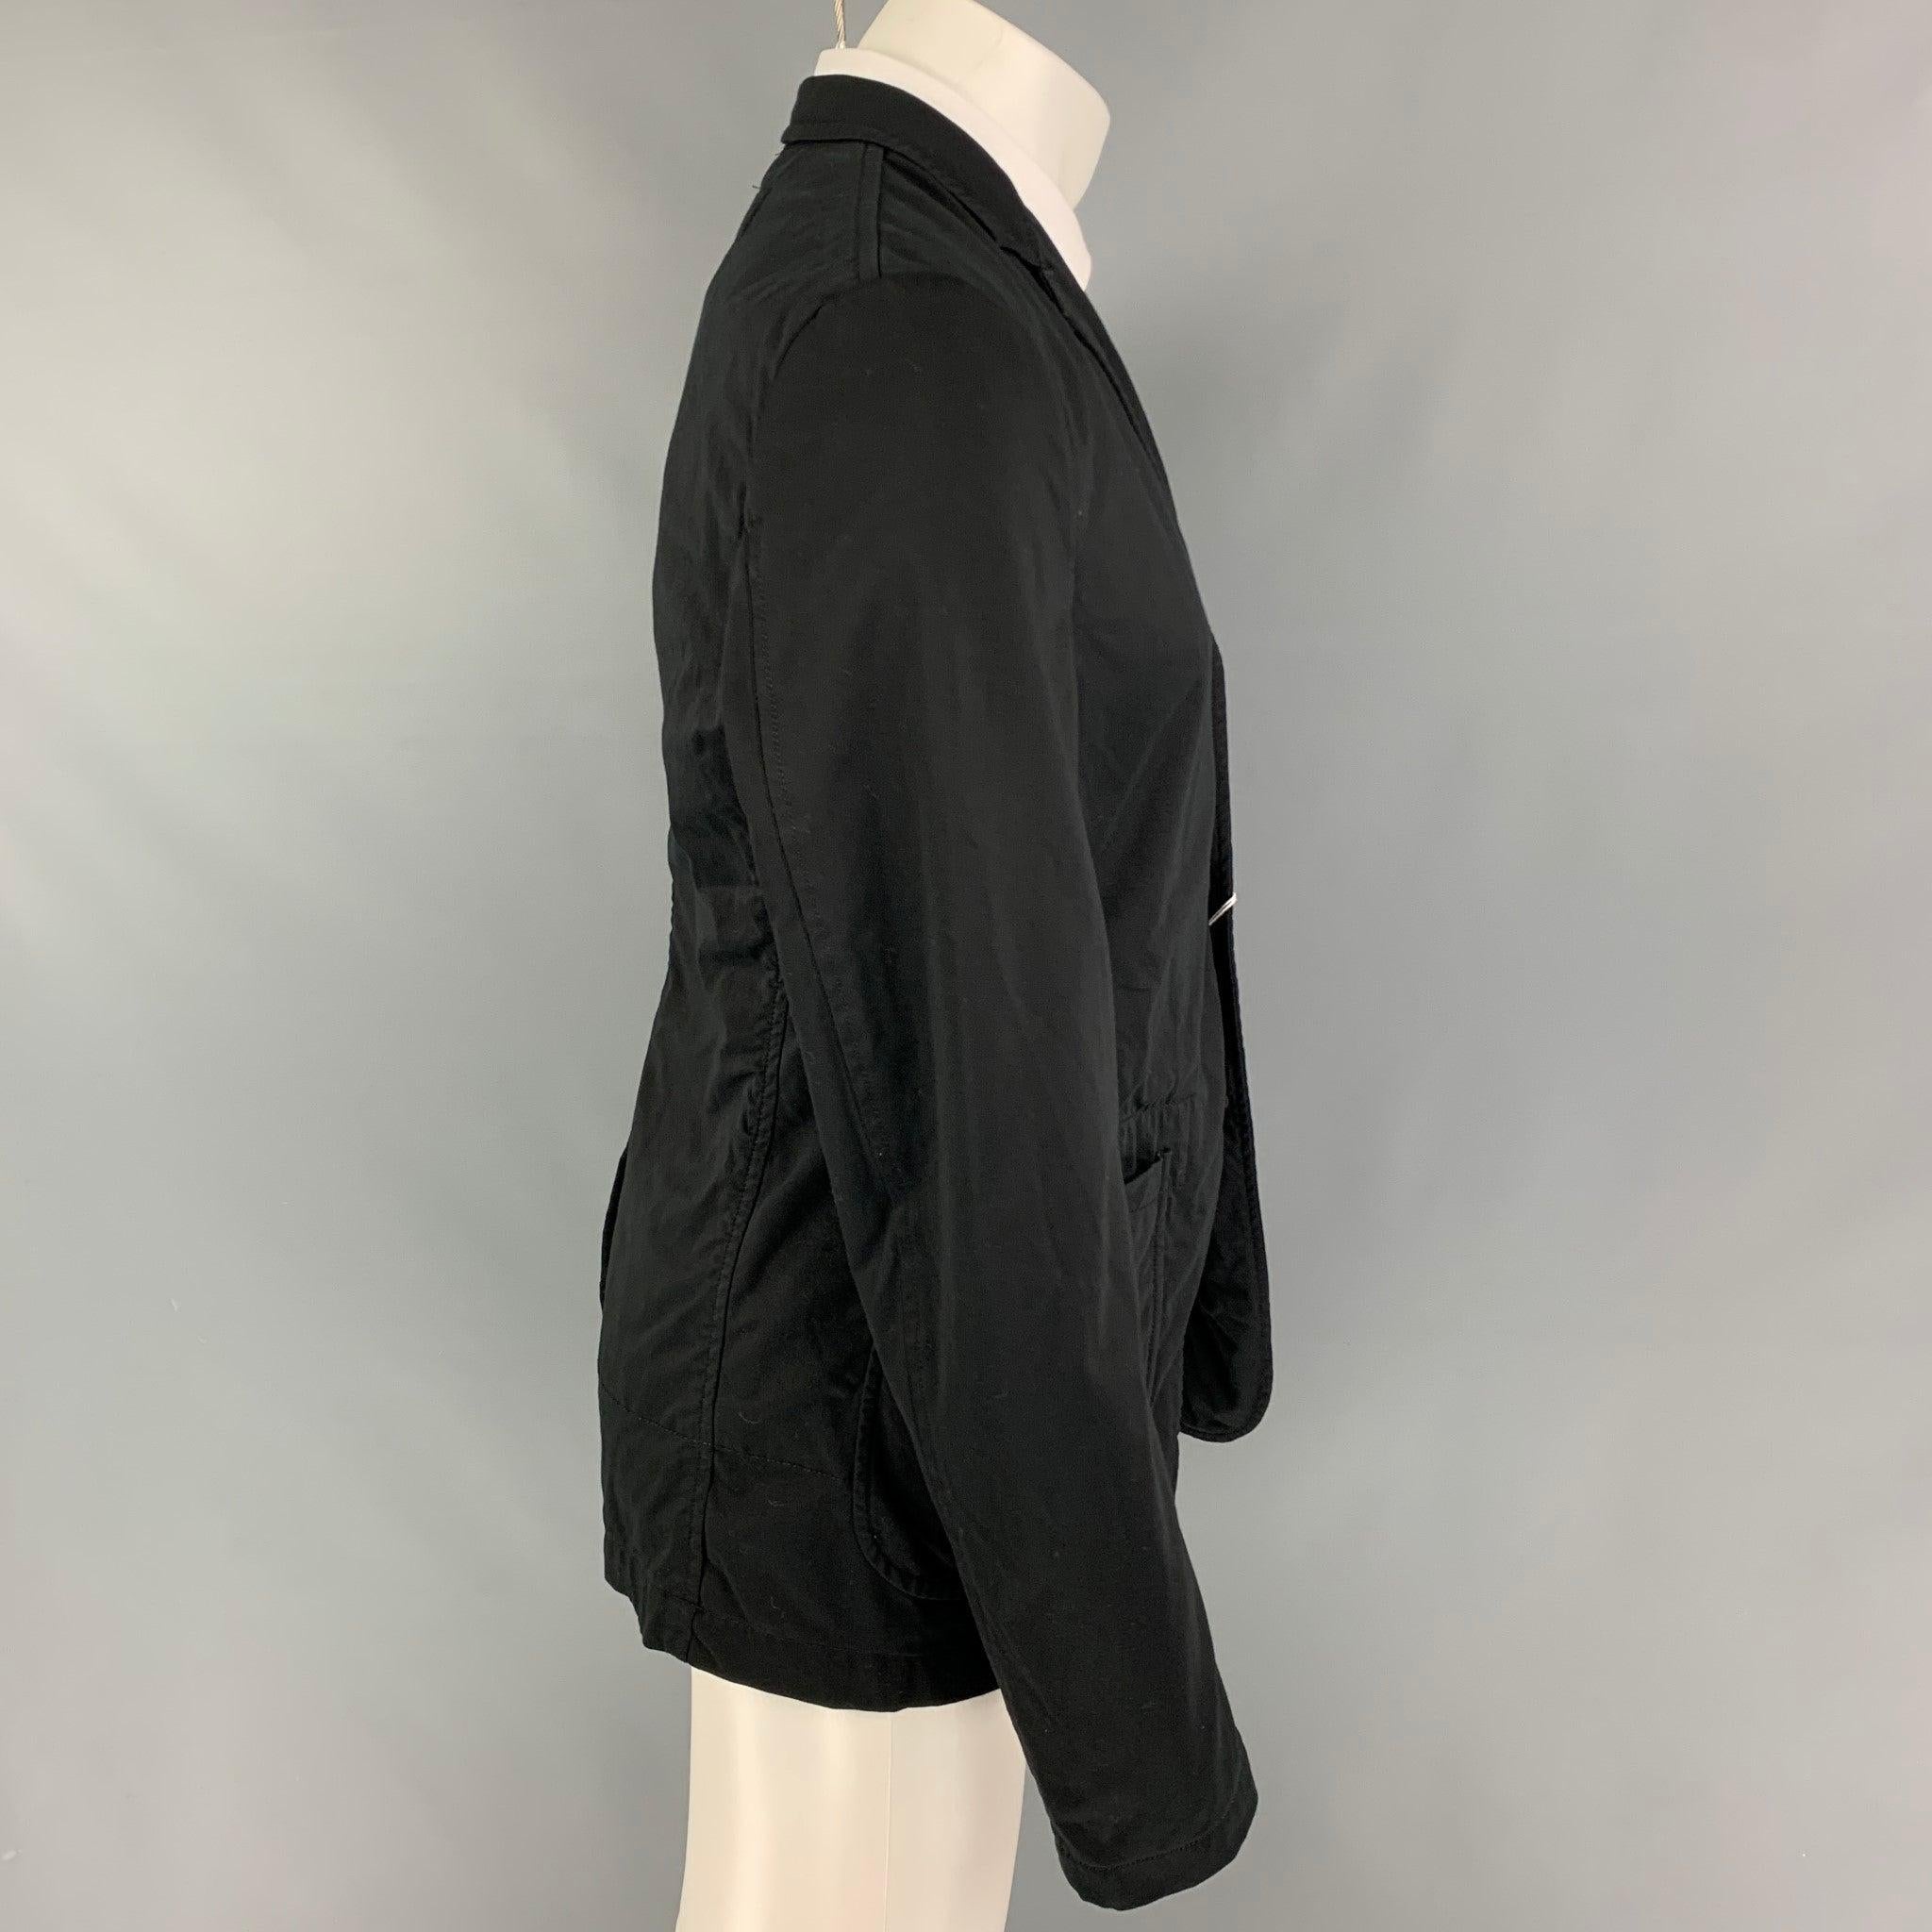 COMME des GARCONS HOMME PLUS sport coat comes in a black cotton blend with a full stripe liner featuring a notch lapel, patch pockets, single back vent, and a three button closure. Made in Japan.
New With Tags.
 

Marked:   L / AD2015